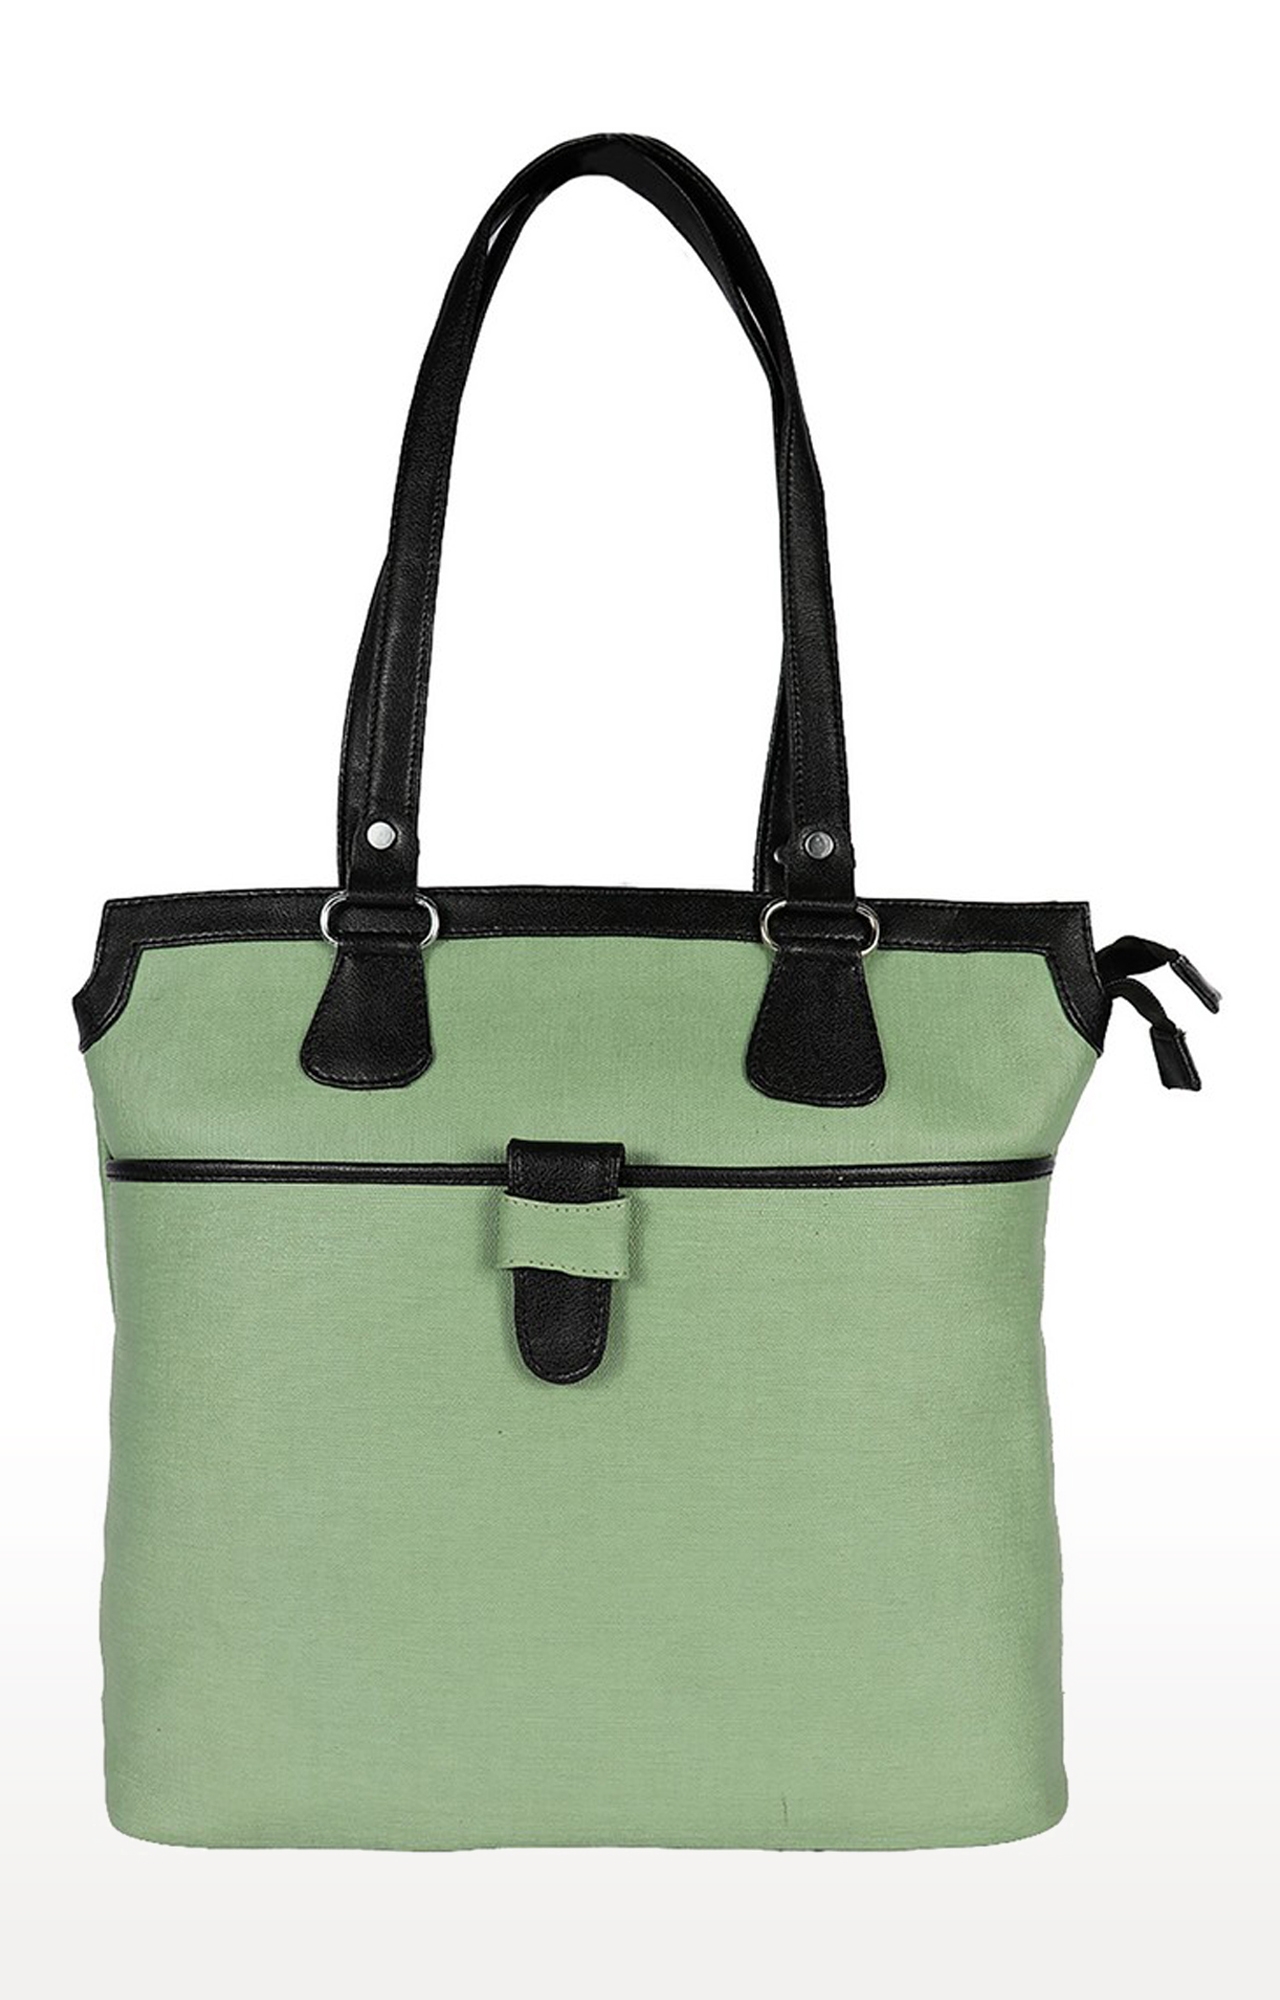 Lely's Latest Spring Collection Tote Bag For Women For Daily Use In Mint